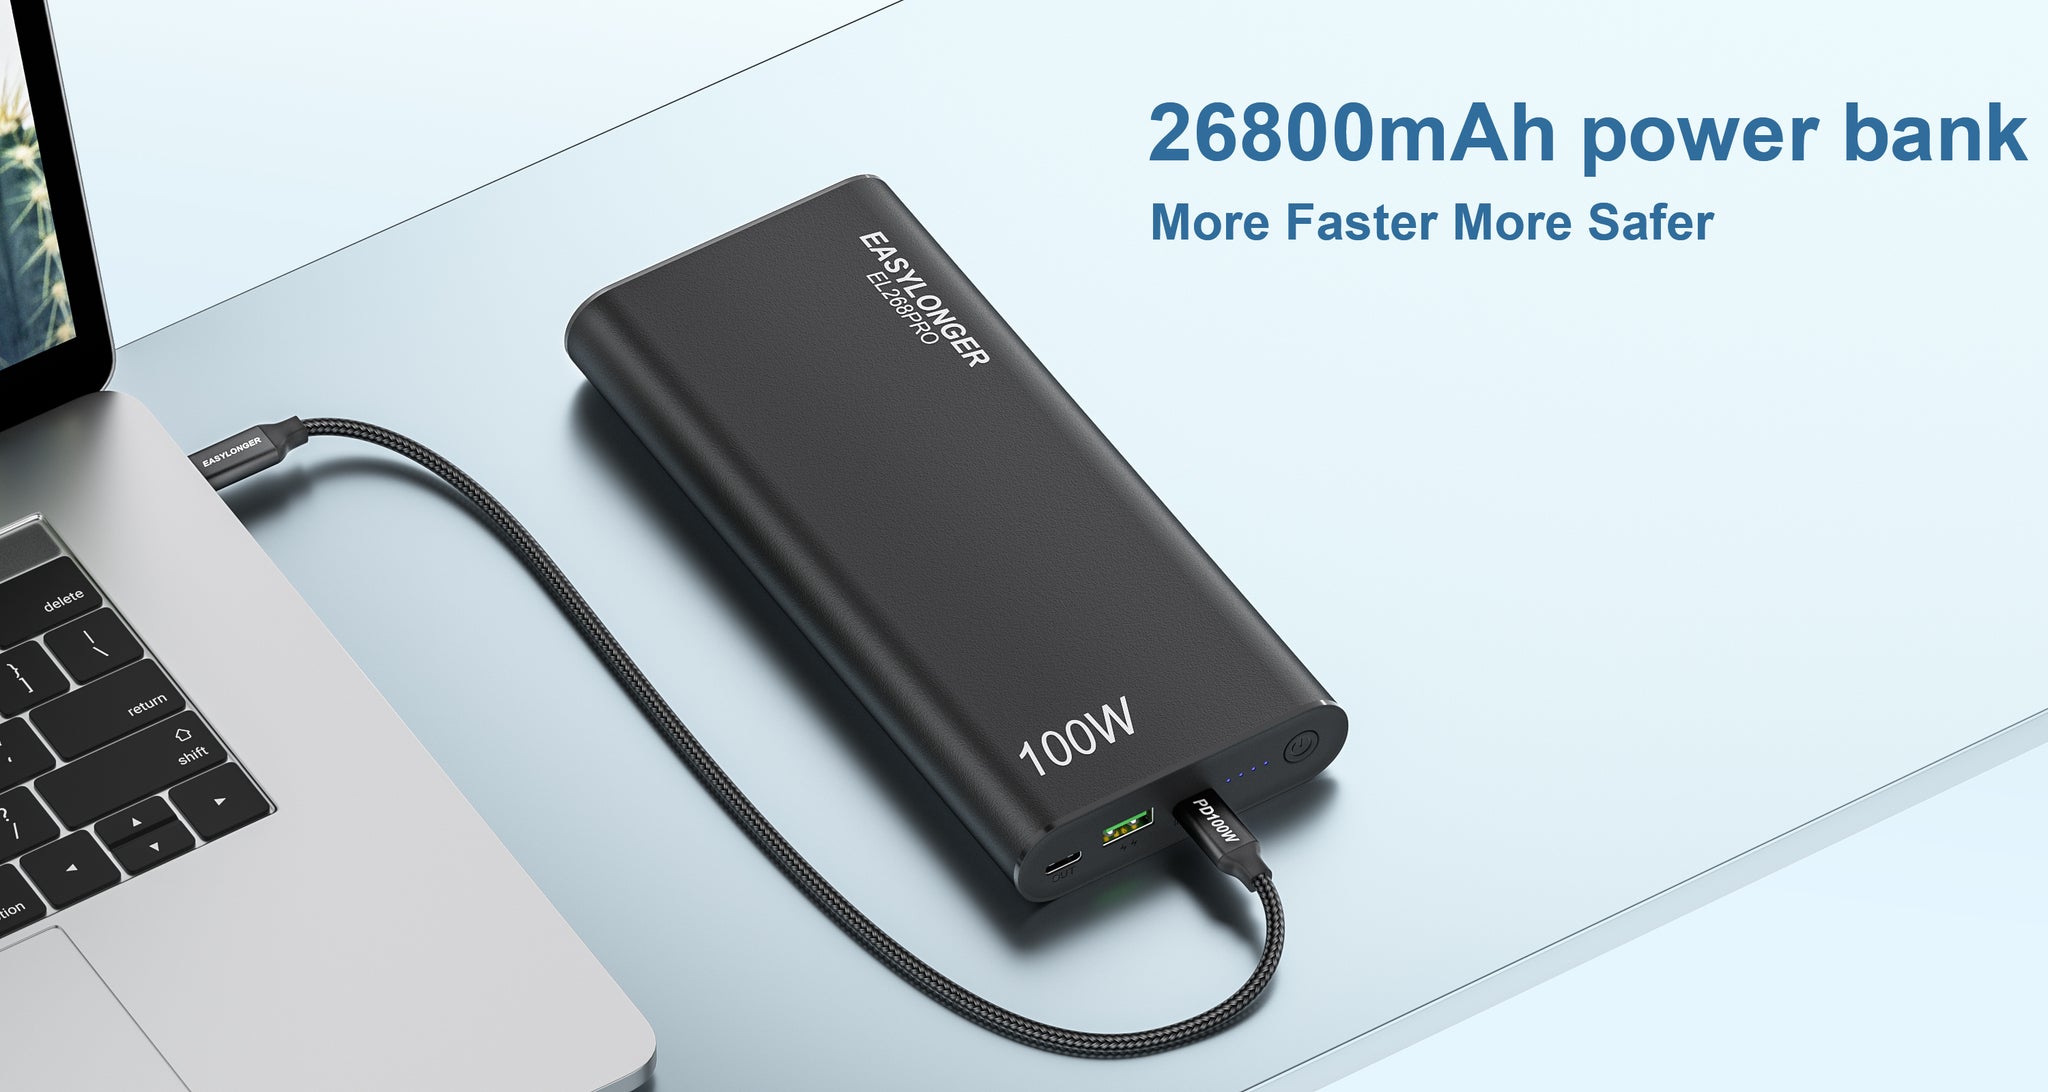 EASYLONGER 100W Laptop Portable Charger, 26800mAh USB C PD Power Bank, External Battery Pack with Dual Quick Charge 3.0 Ports, Fast Charging for Laptops, Tablet, iPhone, Samsung, HP, Dell and More